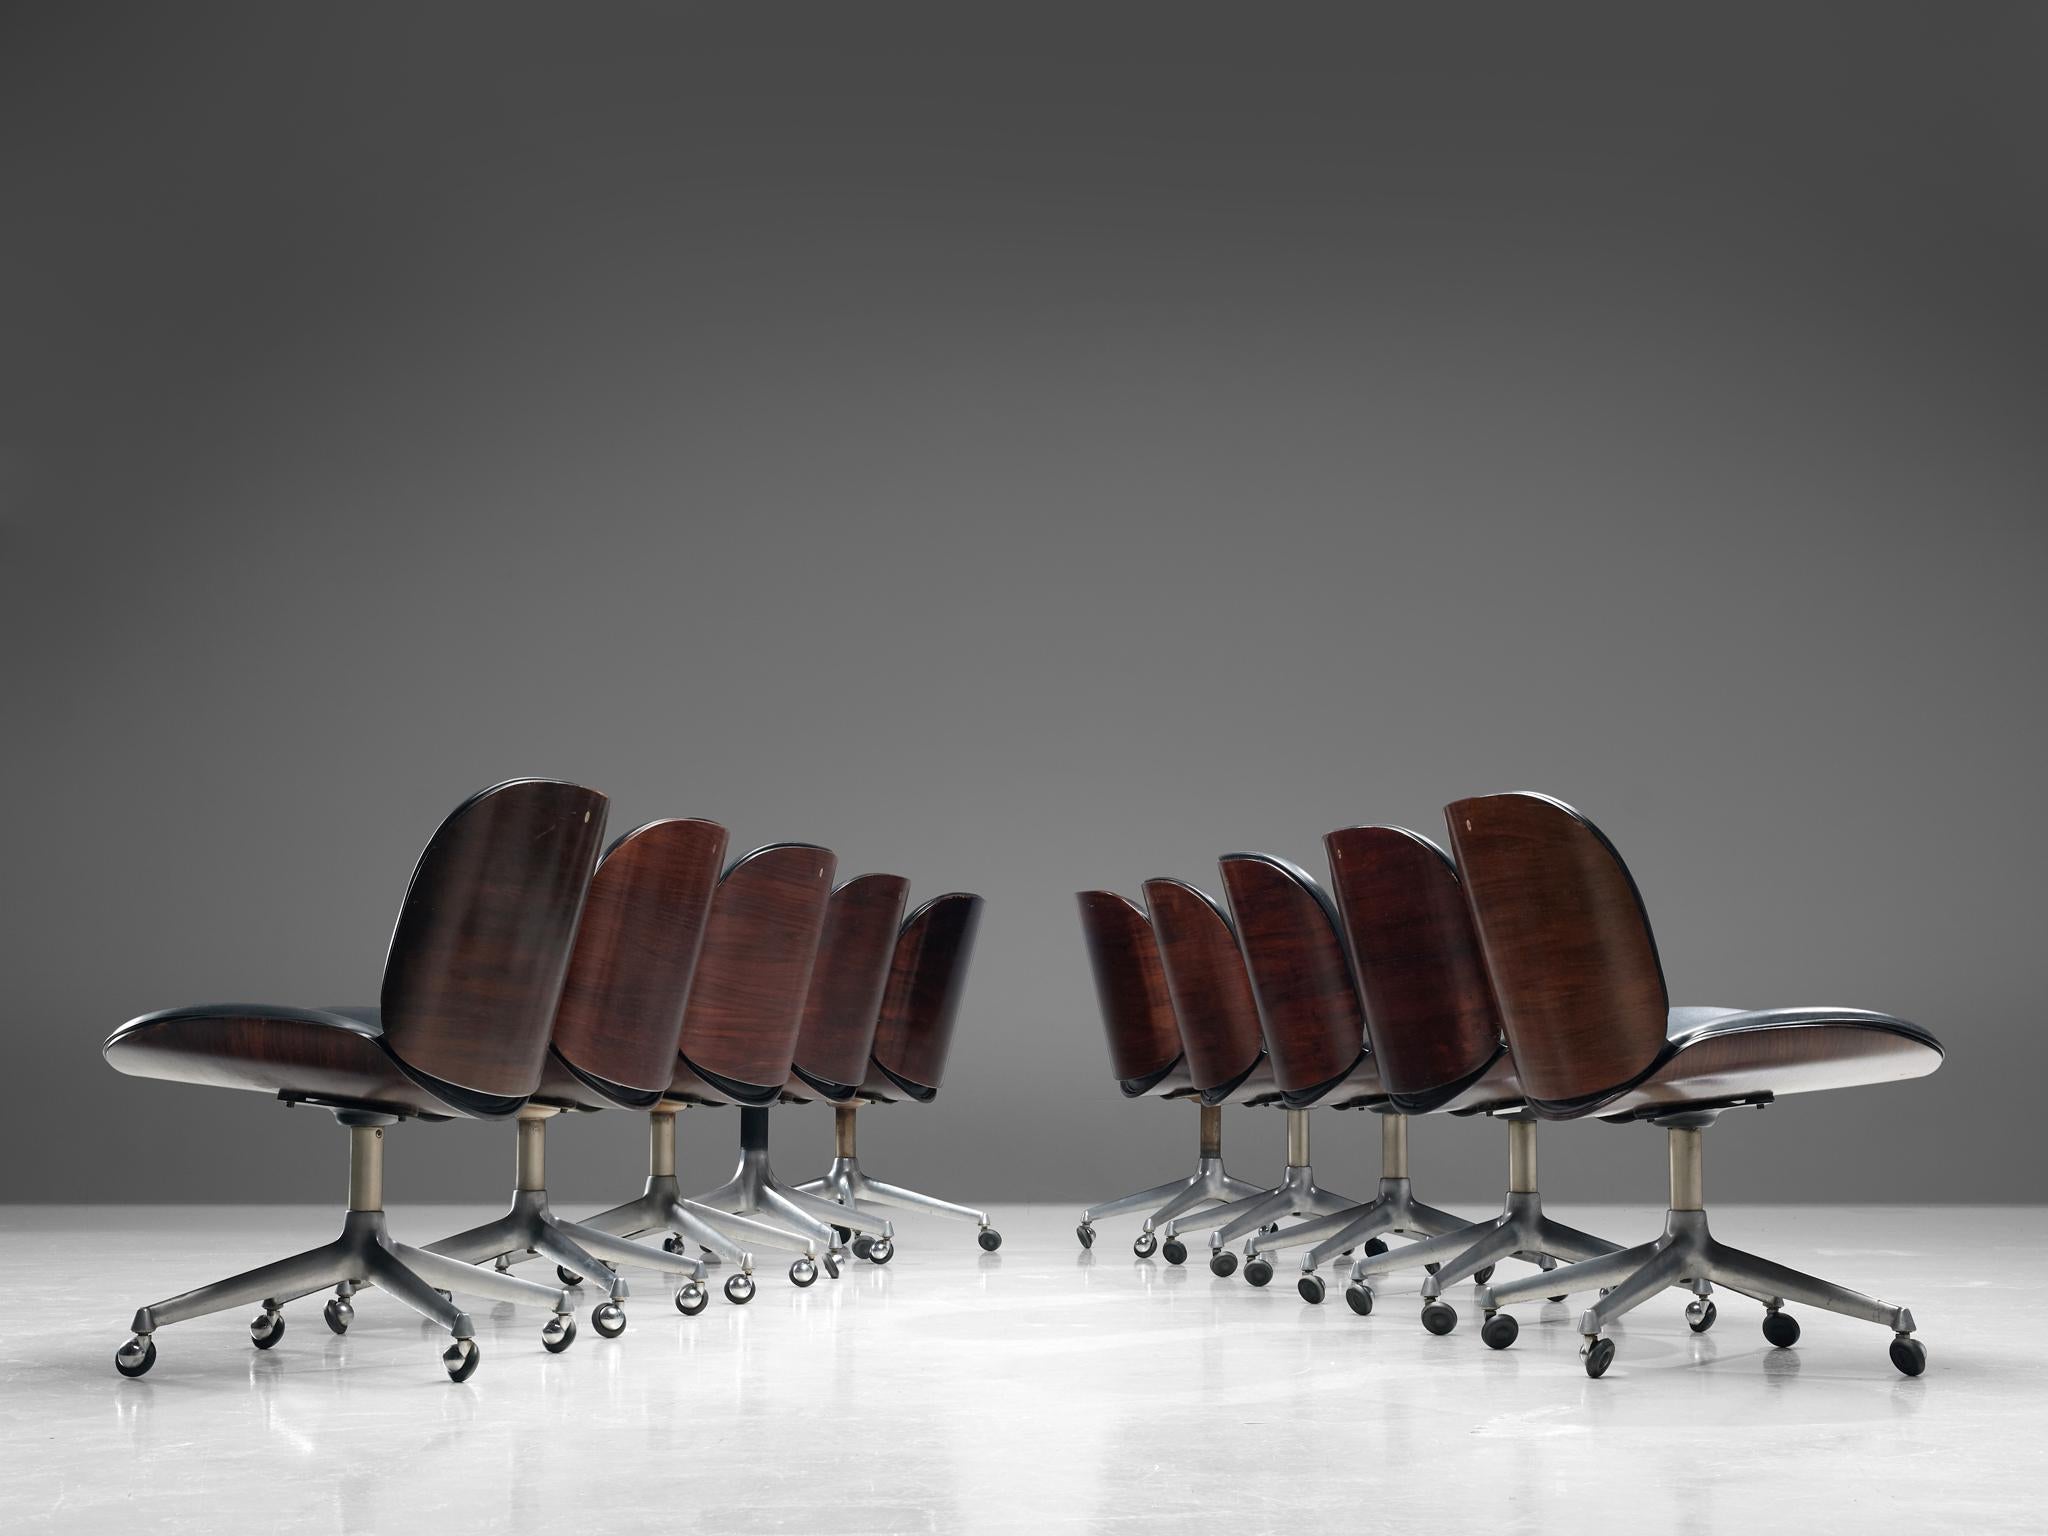 Ico Parisi for MIM Roma, set of 10 office chairs, rosewood, metal and leatherette, Italy, 1960s.

Swivel chairs from the 'Terni' series by MIM Roma. The seating and back consist of curved rosewood shells which hold the black leatherette cushions.